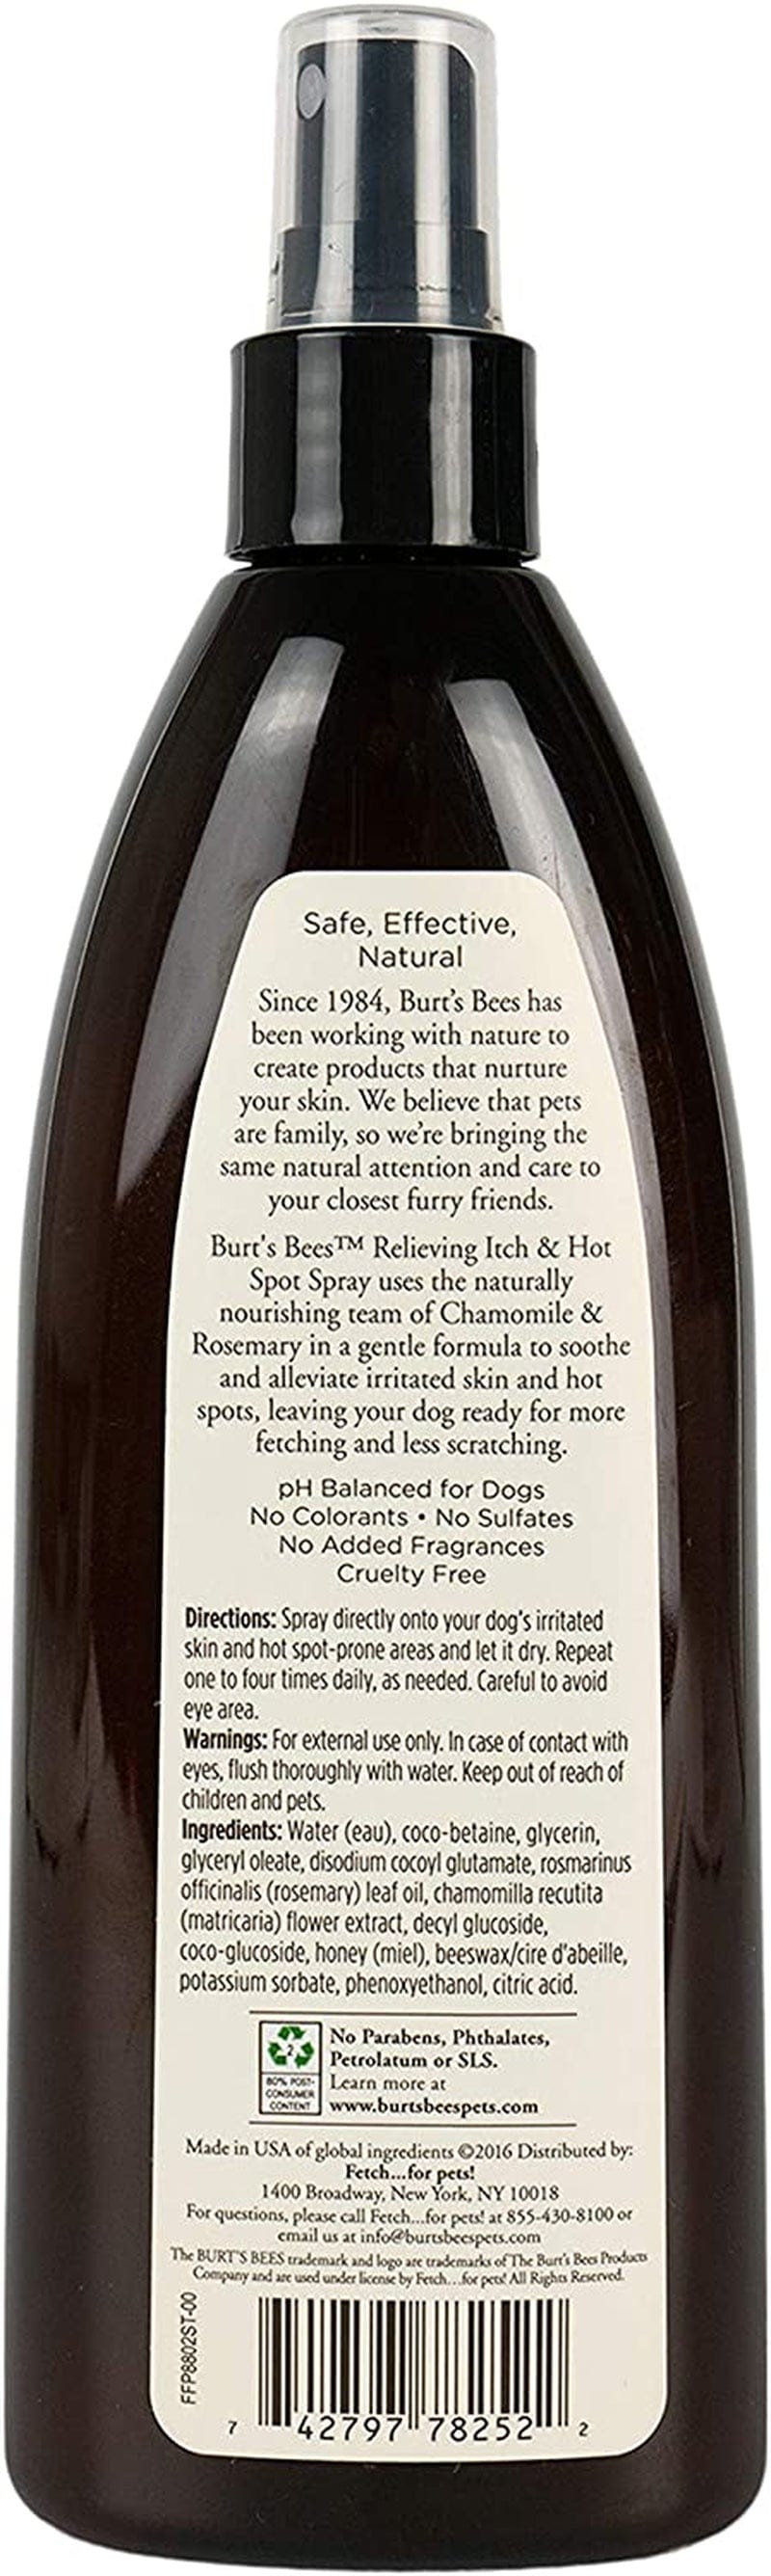 Burt'S Bees for Pets Care Plus+ Natural Relieving Itch & Hot Spot Spray with Chamomile & Rosemary | Best Hot Spot Treatment for Dogs | Cruelty Free, Sulfate & Paraben Free - Made in USA, 12 Oz